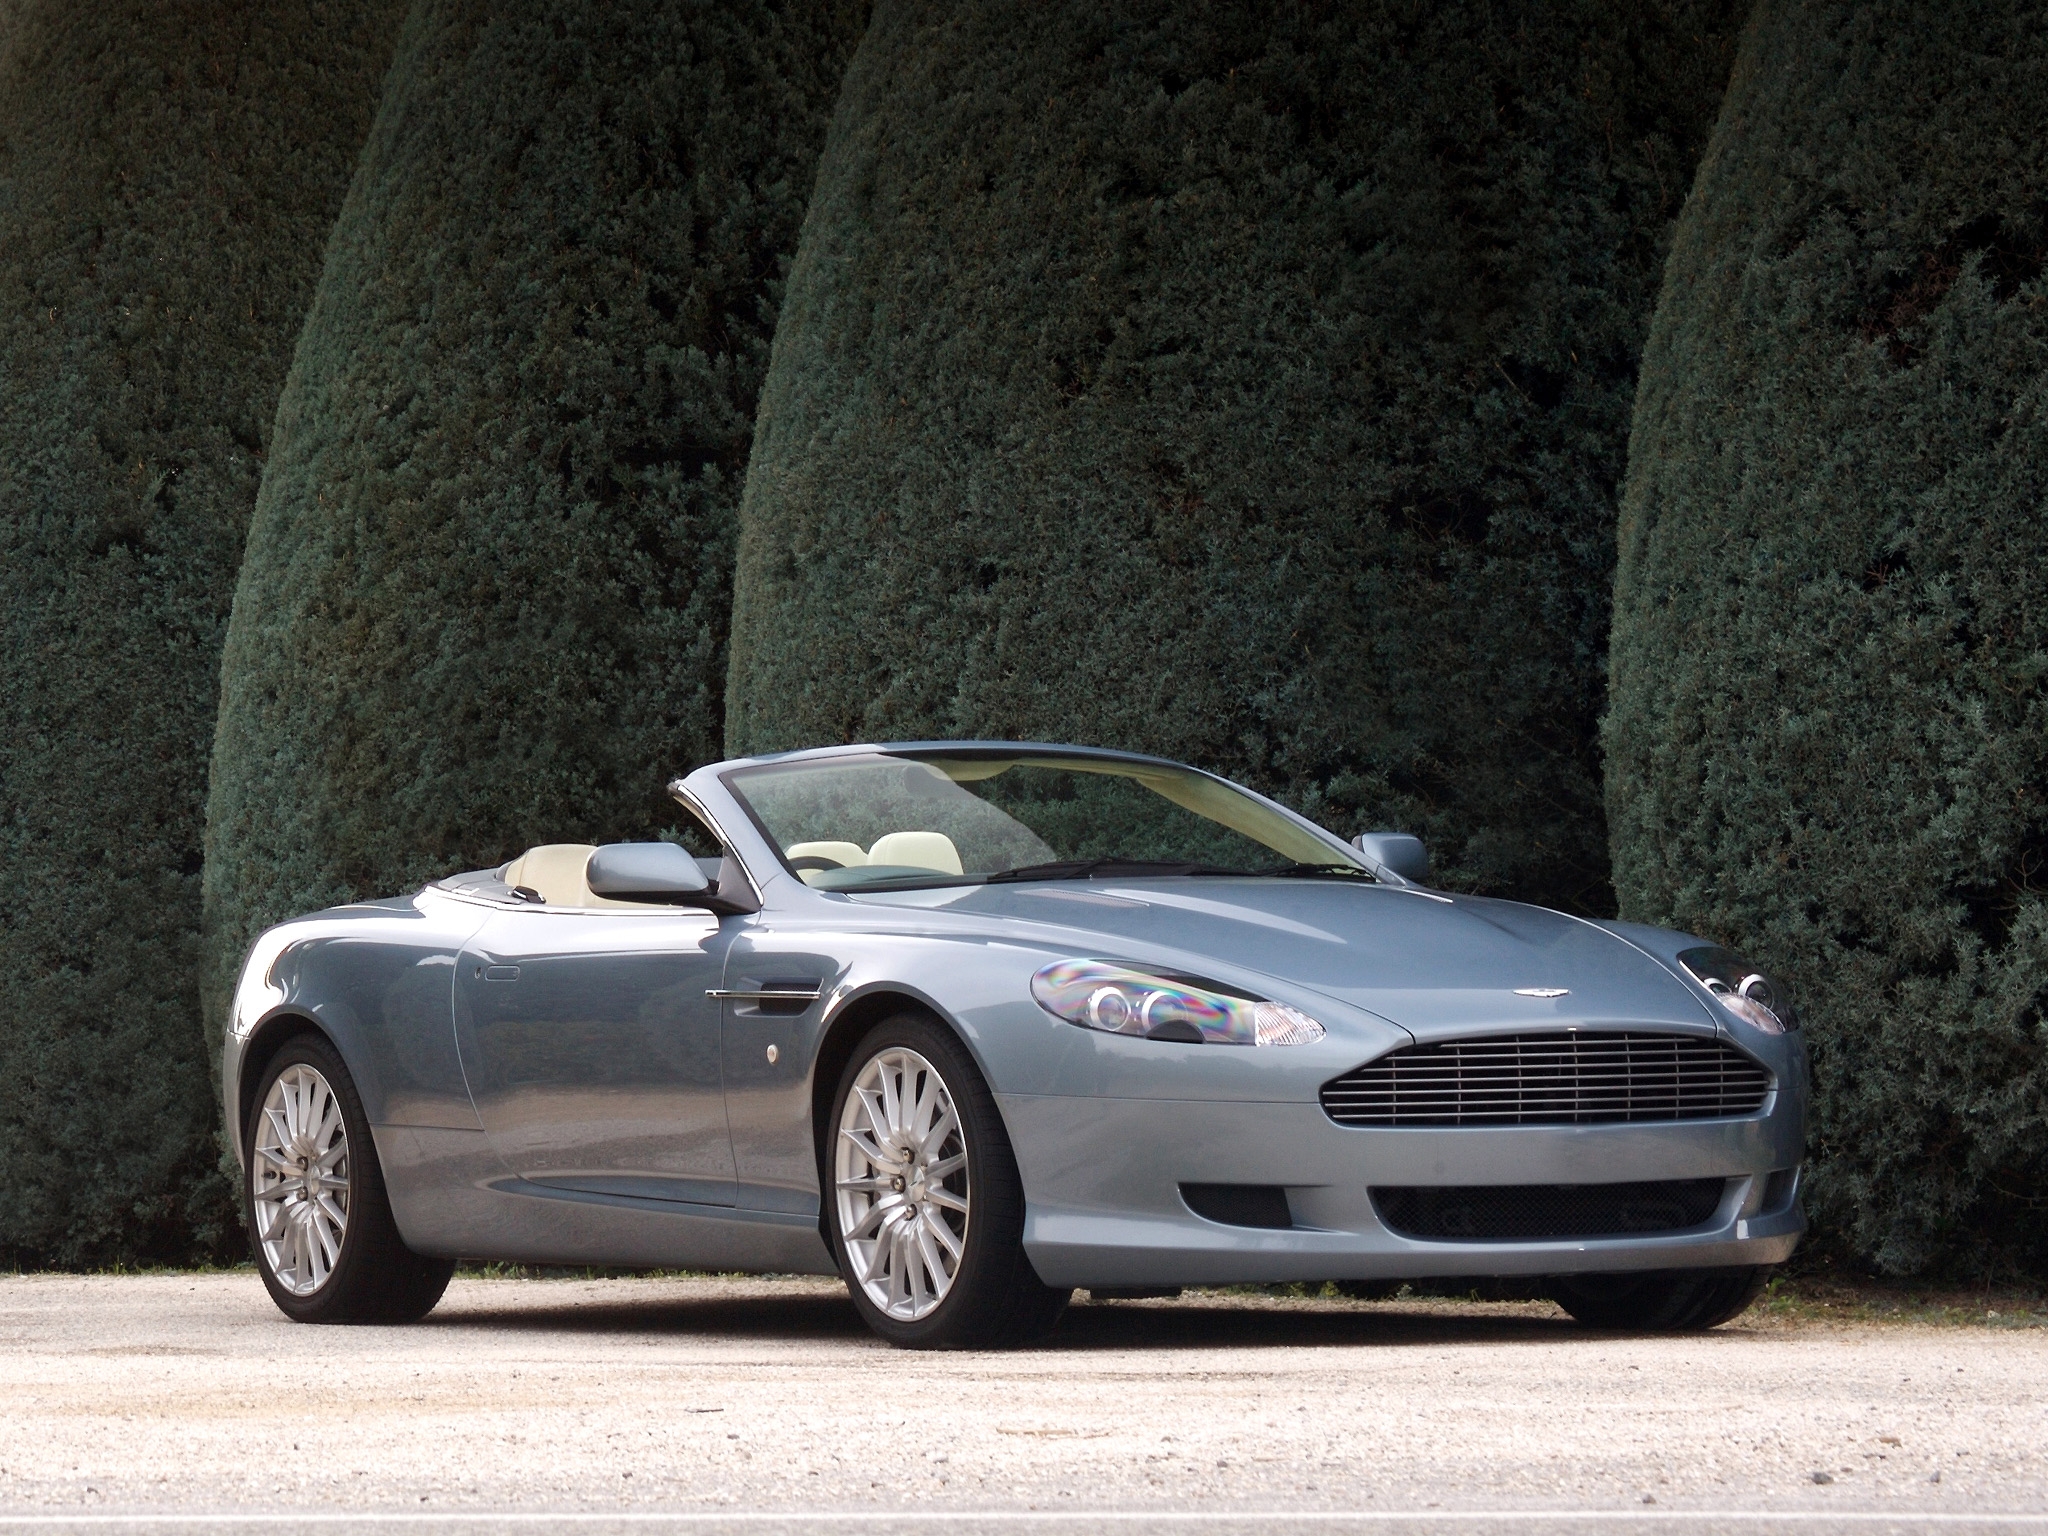 Windows Backgrounds aston martin, auto, cars, blue, side view, style, shrubs, 2004, db9